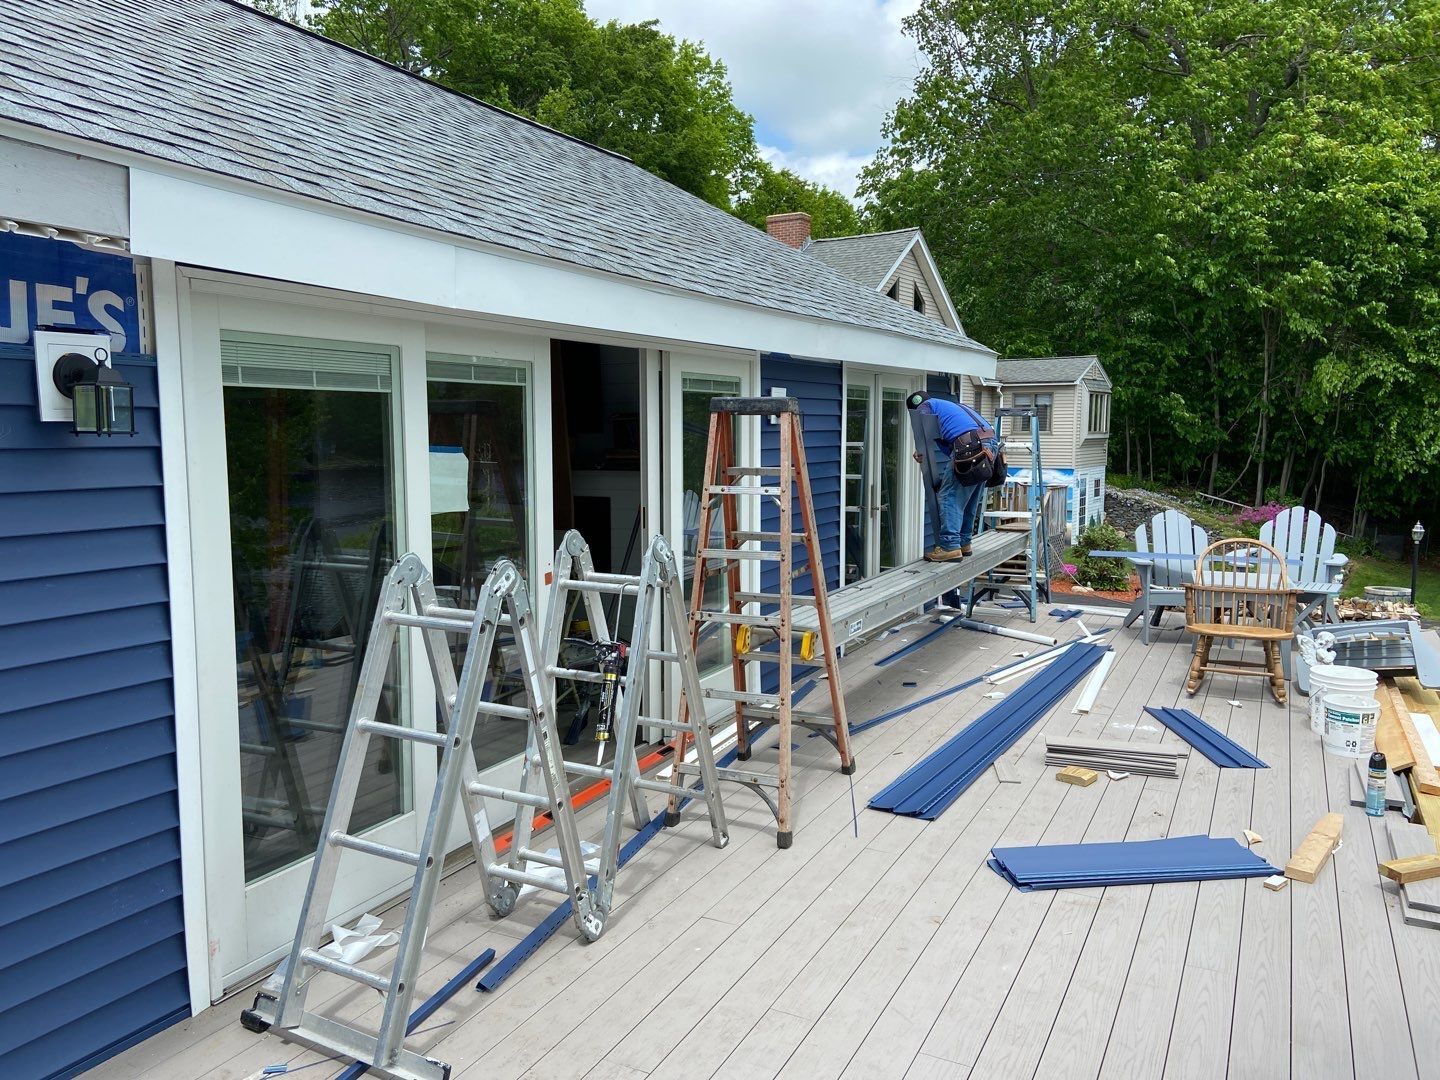 installation of new siding and white trim